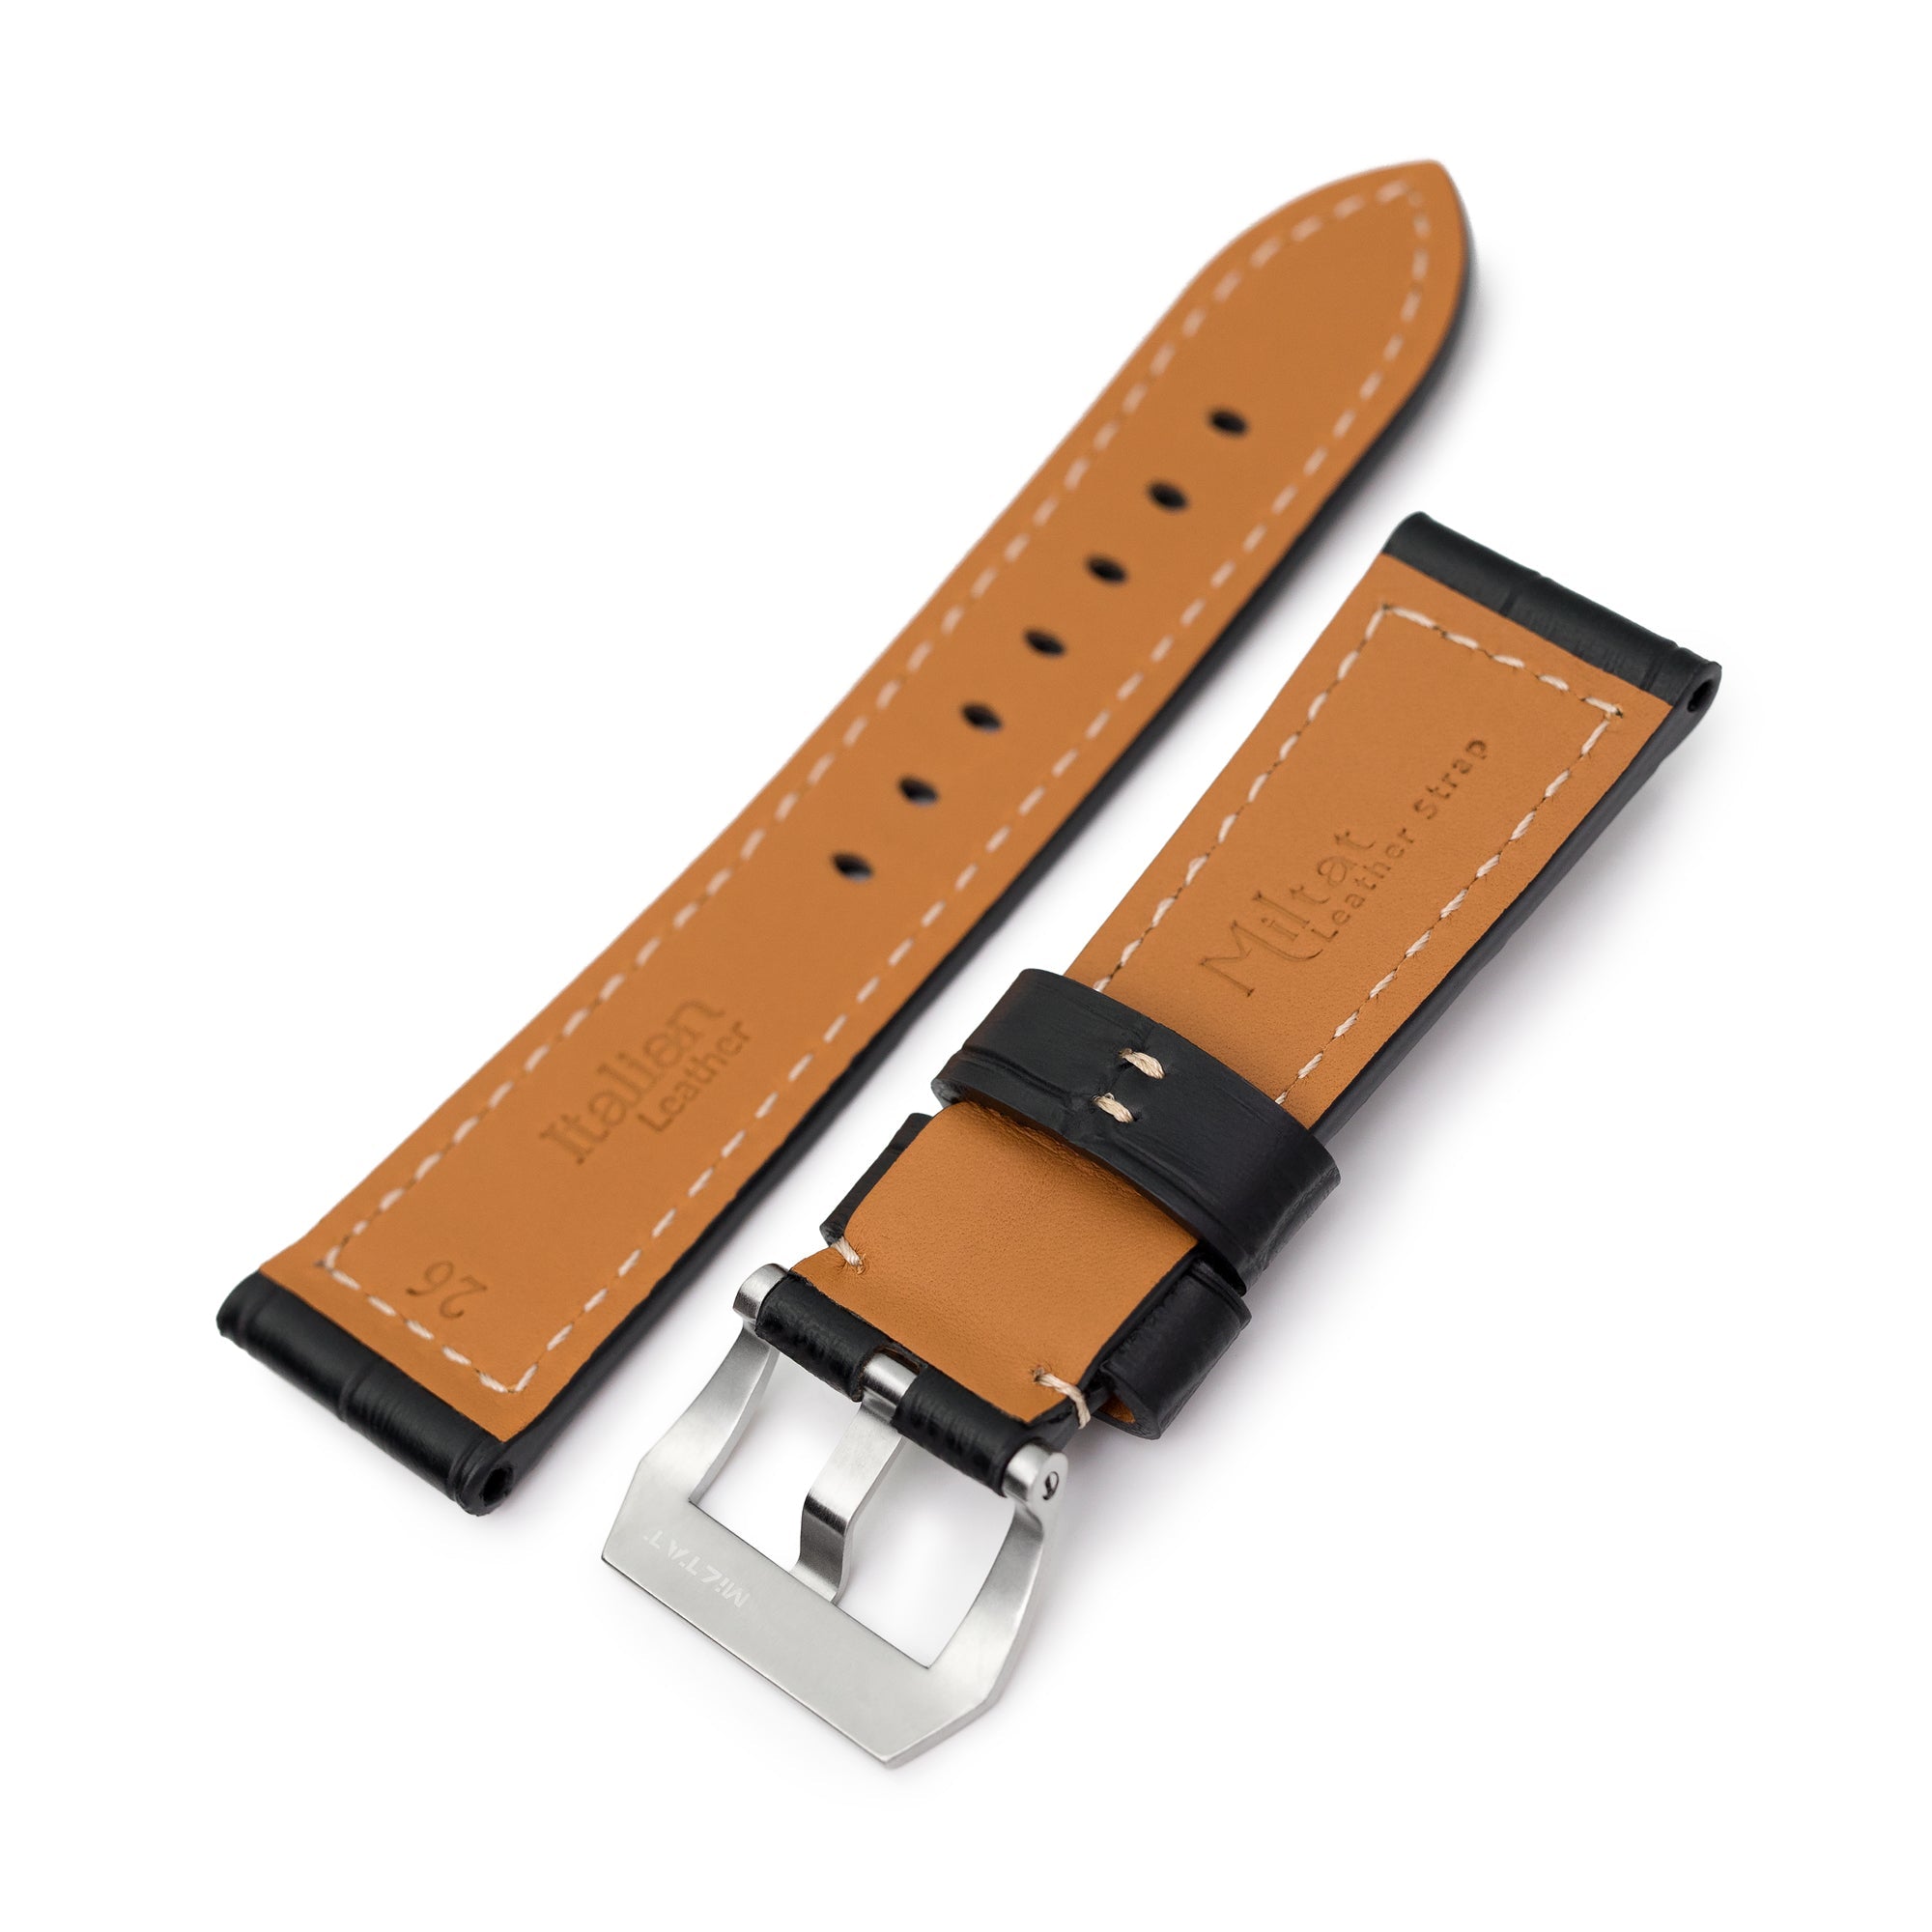 Pam Collection, Black Croco Grain Italian Leather Watch Strap for Panerai, Beige Stitching Strapcode watch bands